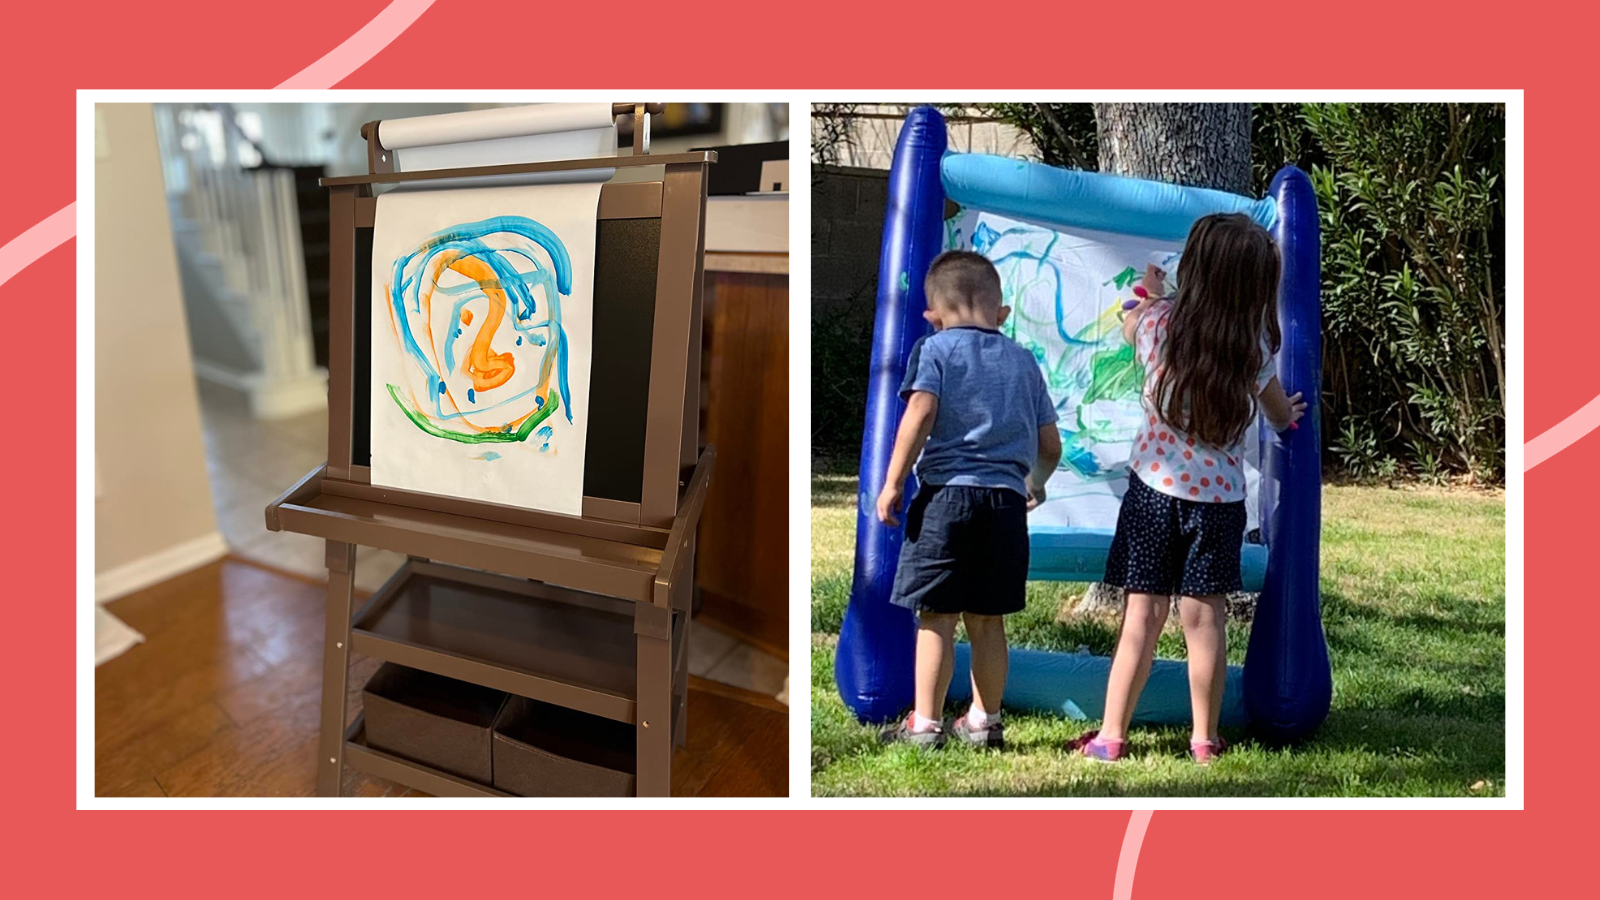 Kids Art Set Children's Painting Board Wooden Easel Drawing Board Gift  Present